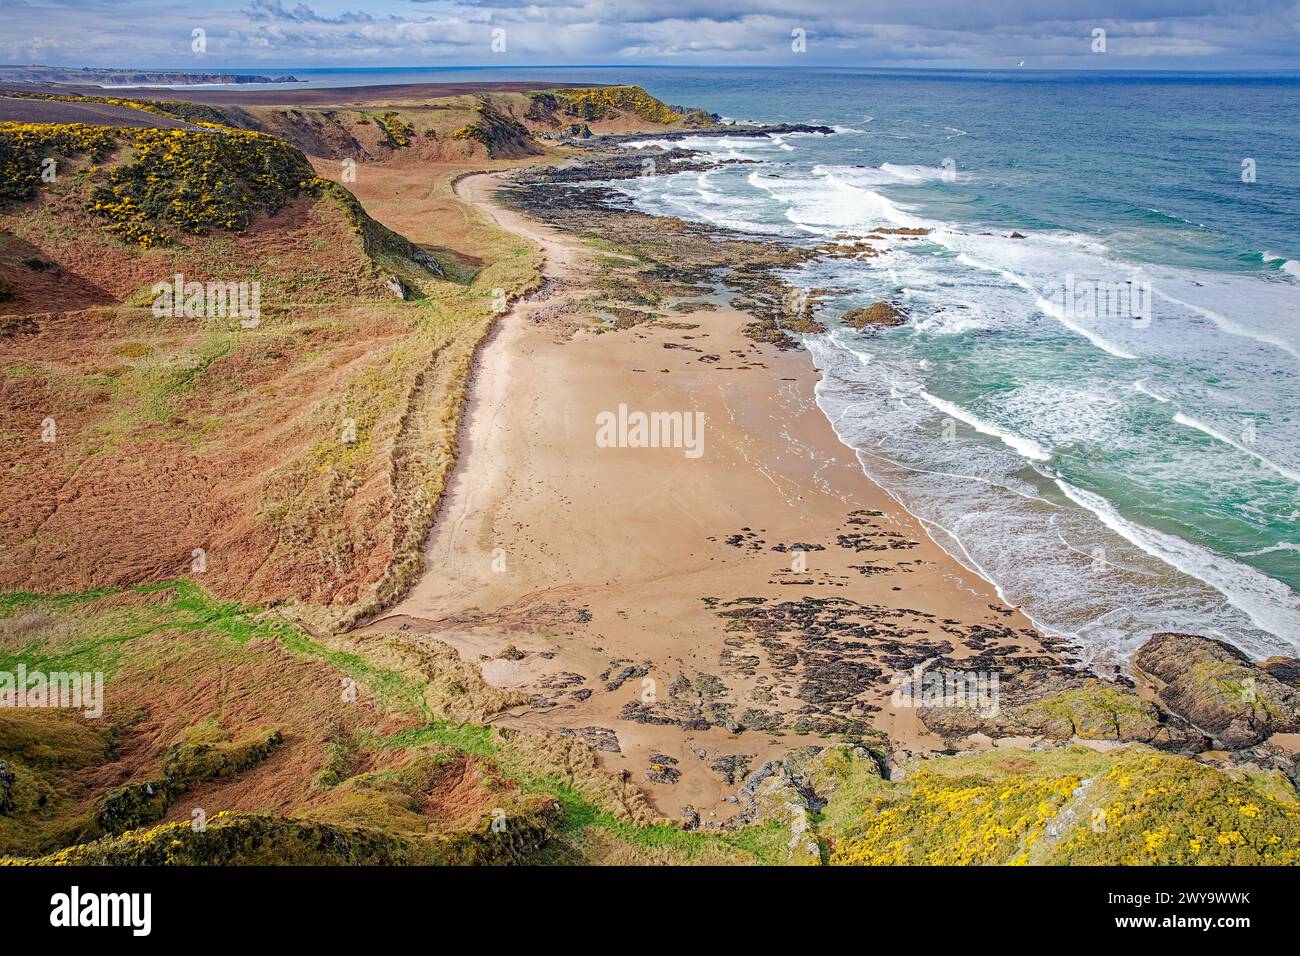 Sunnyside Beach Cullen Aberdeenshire Scotland view of coastline the rock and sand beach the sea and yellow gorse in Springtime Stock Photo